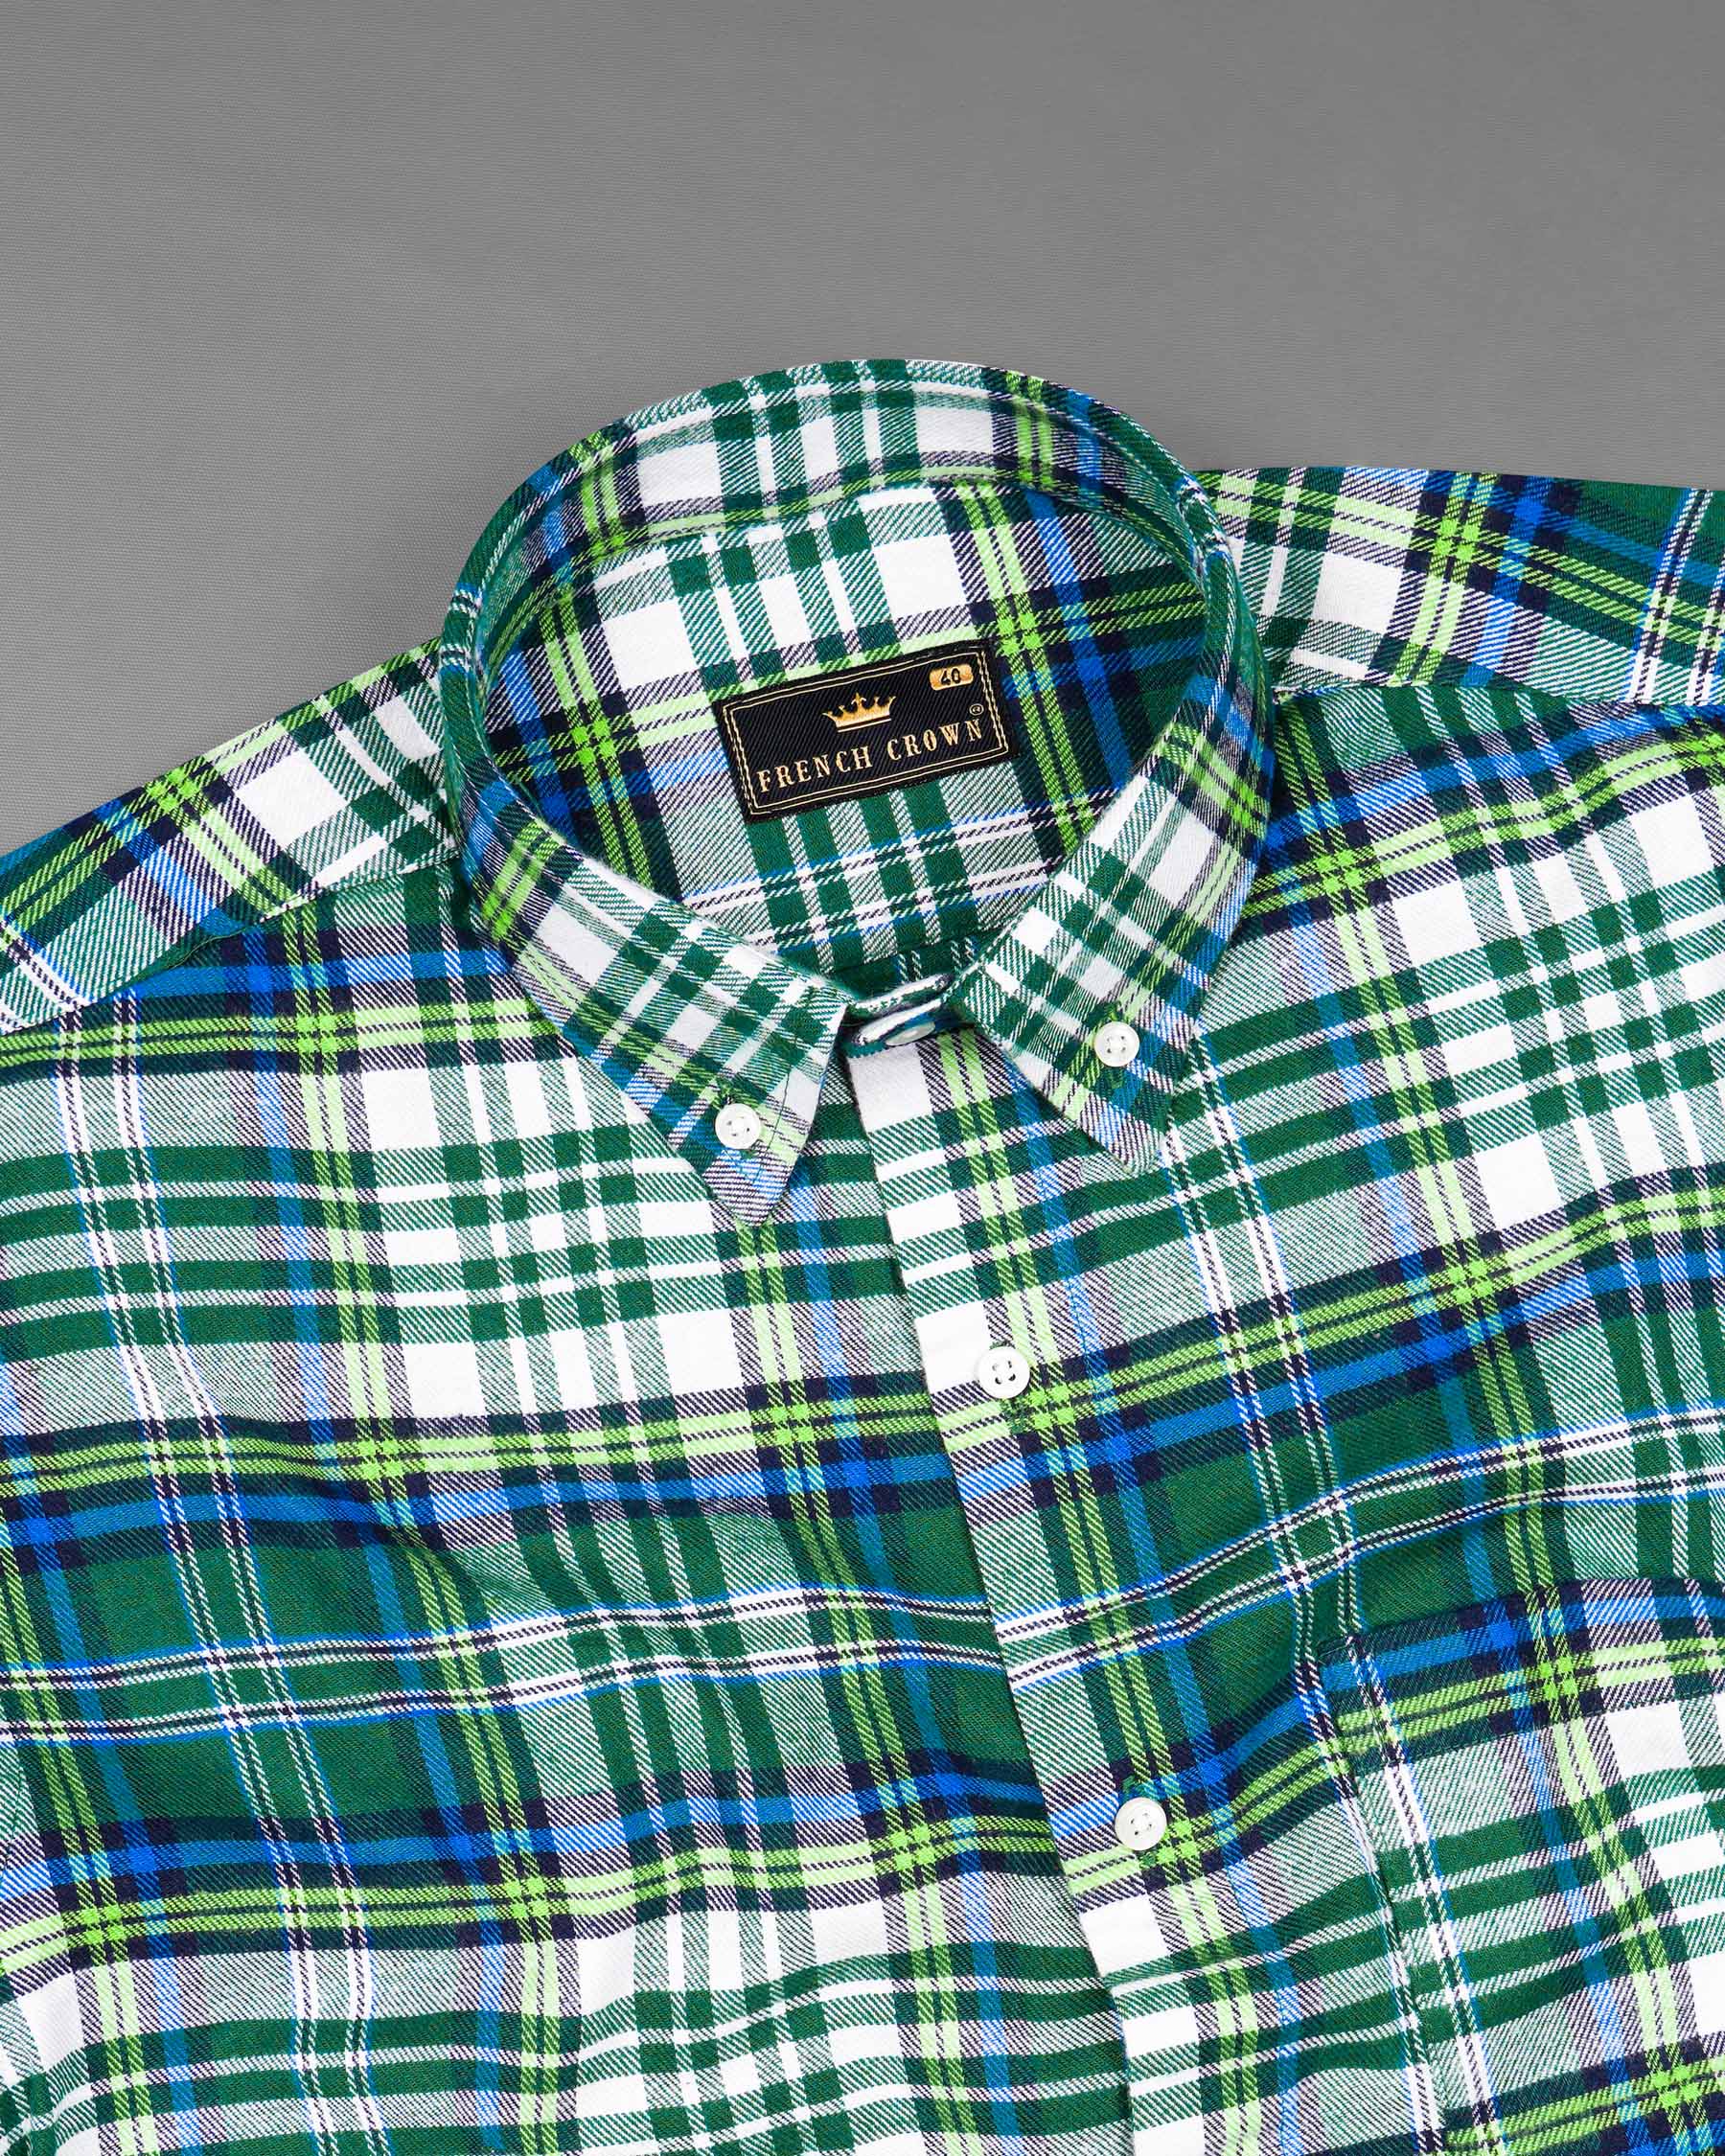 Dark Teal Green and White Plaid Flannel Overshirt 7639-BD-38, 7639-BD-H-38, 7639-BD-39,7639-BD-H-39, 7639-BD-40, 7639-BD-H-40, 7639-BD-42, 7639-BD-H-42, 7639-BD-44, 7639-BD-H-44, 7639-BD-46, 7639-BD-H-46, 7639-BD-48, 7639-BD-H-48, 7639-BD-50, 7639-BD-H-50, 7639-BD-52, 7639-BD-H-52